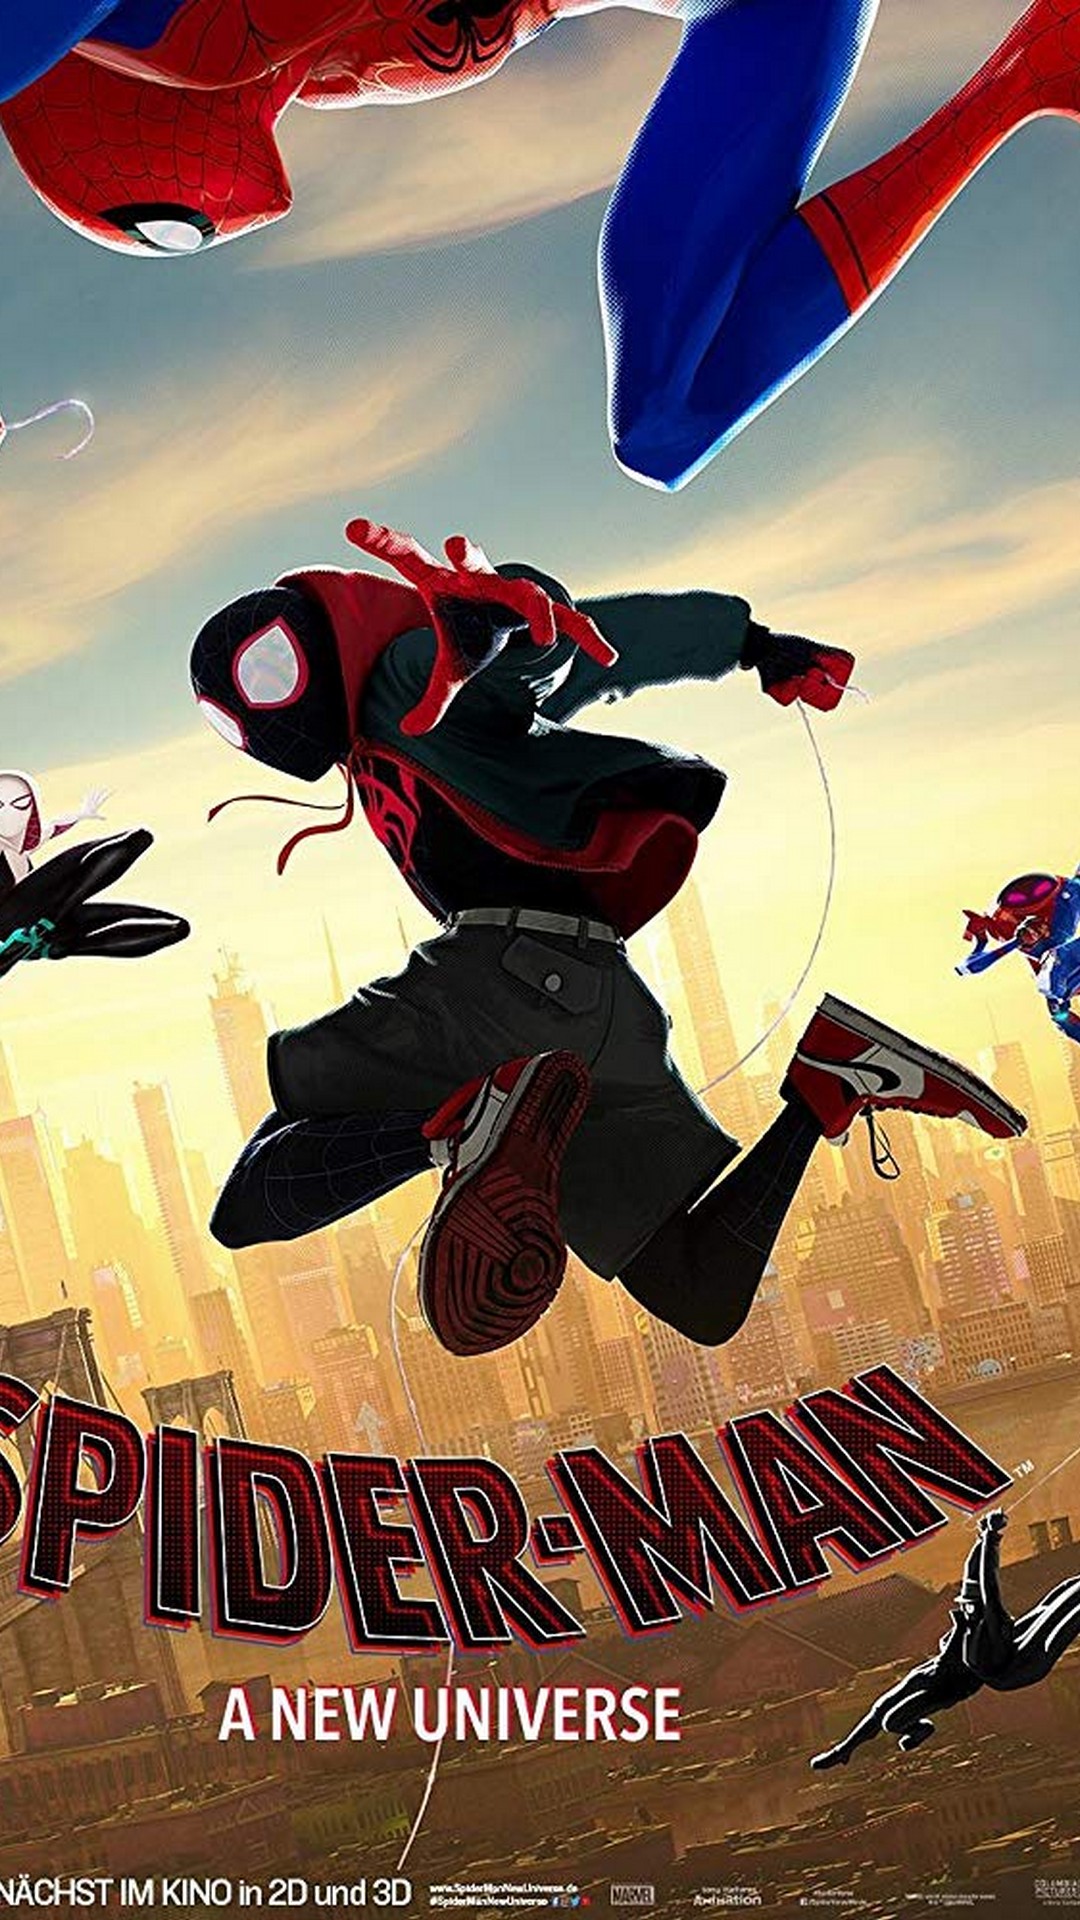 Spider-Man Into the Spider-Verse 2018 Android Wallpaper with image resolution 1080x1920 pixel. You can make this wallpaper for your Android backgrounds, Tablet, Smartphones Screensavers and Mobile Phone Lock Screen